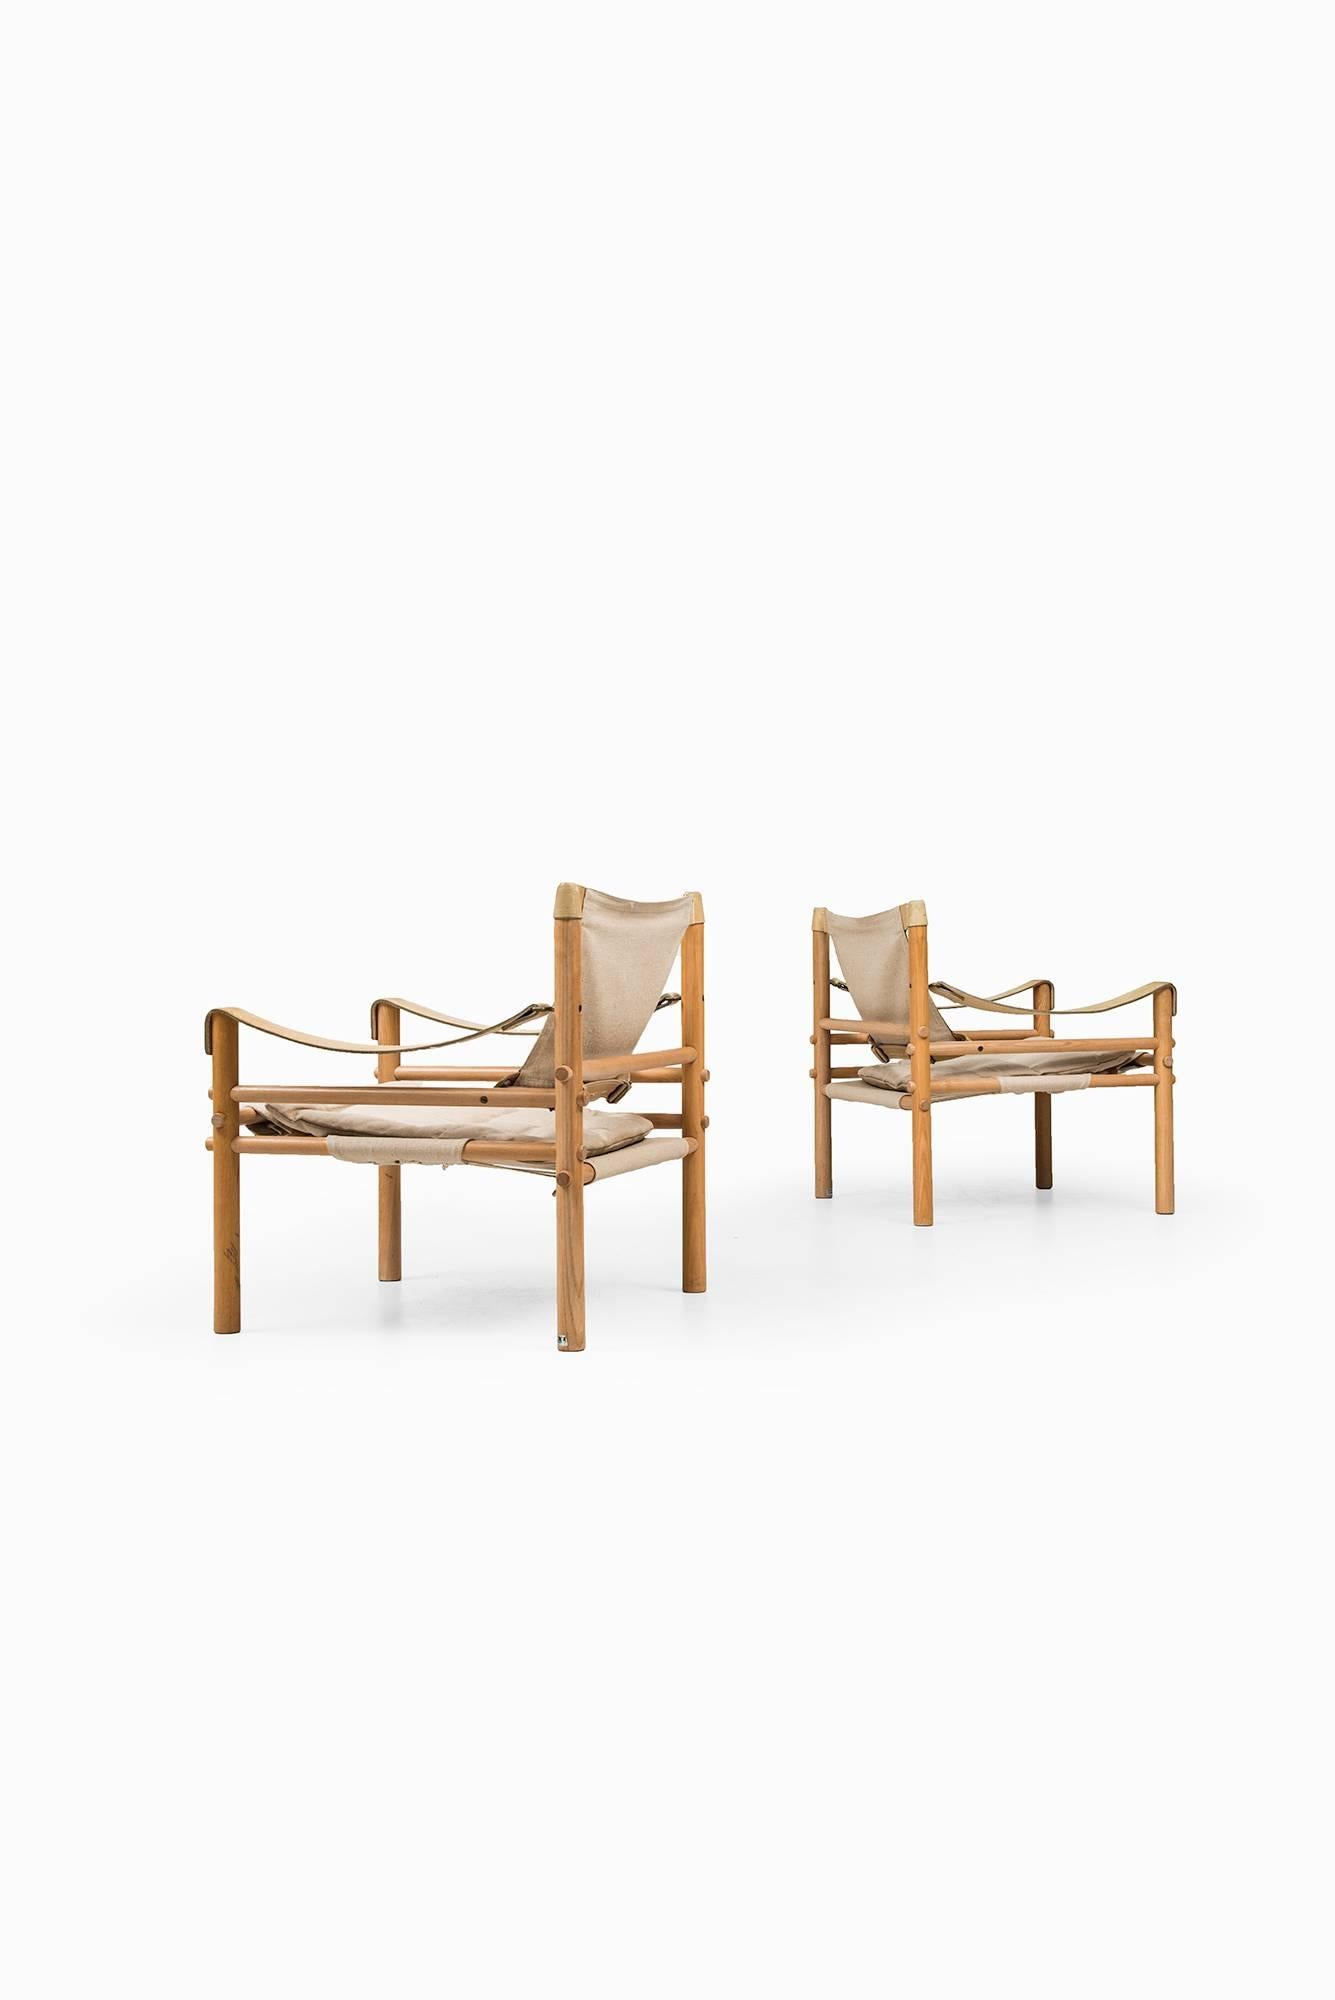 A pair of easy chair model Sirocco/Scirocco designed by Arne Norell. Produced by Arne Norell AB in Aneby, Sweden.